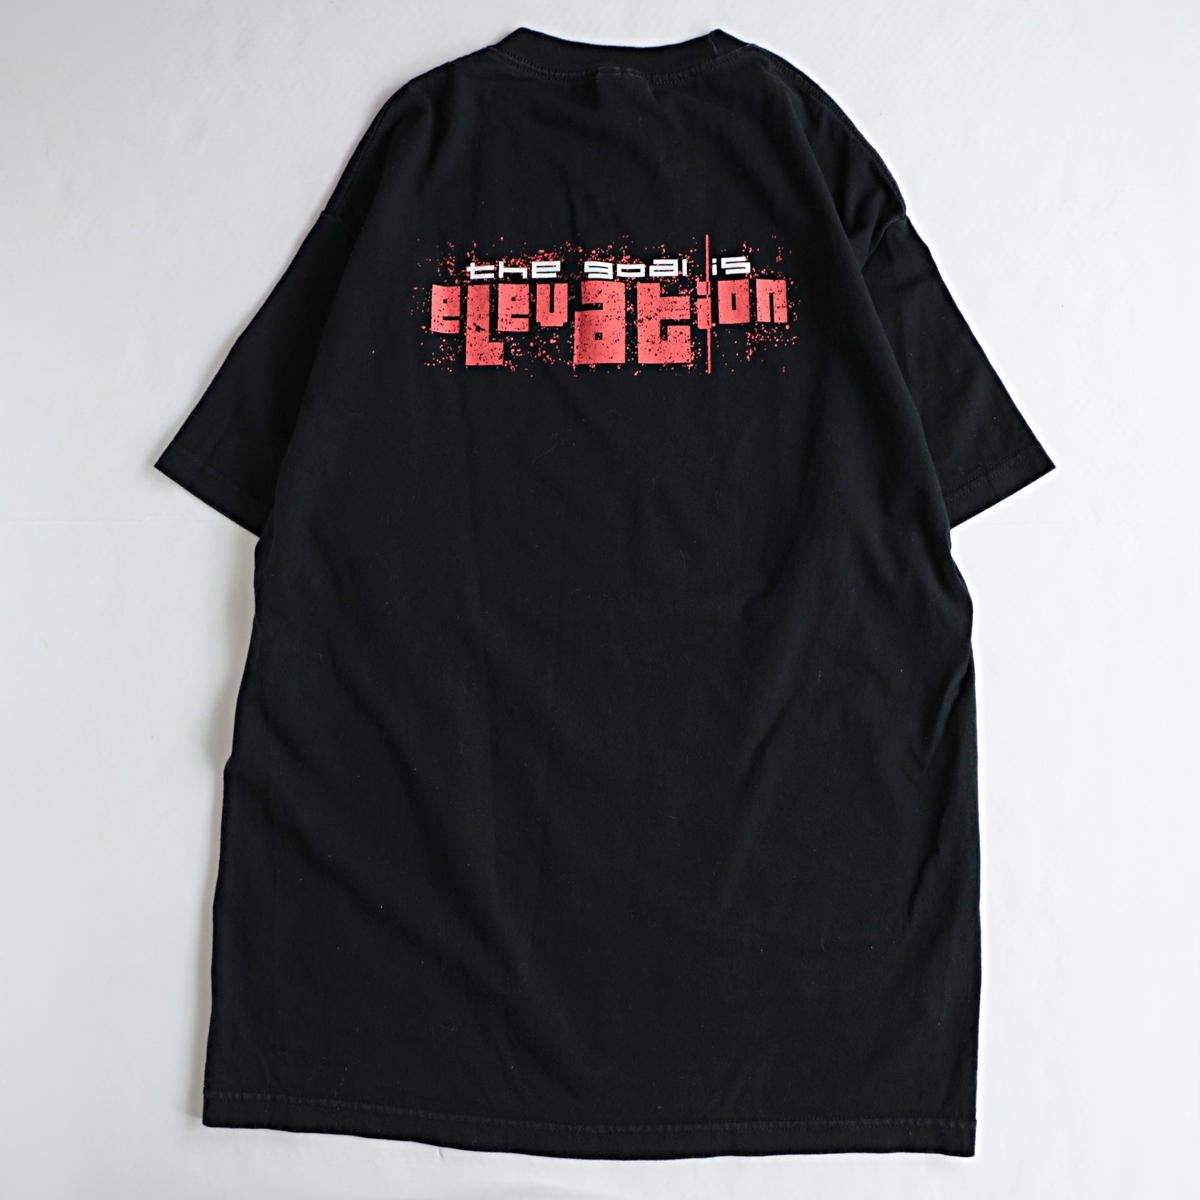 00s U2 「The Goal Is Elevation」ツアー ロック バンド Tシャツ usa製